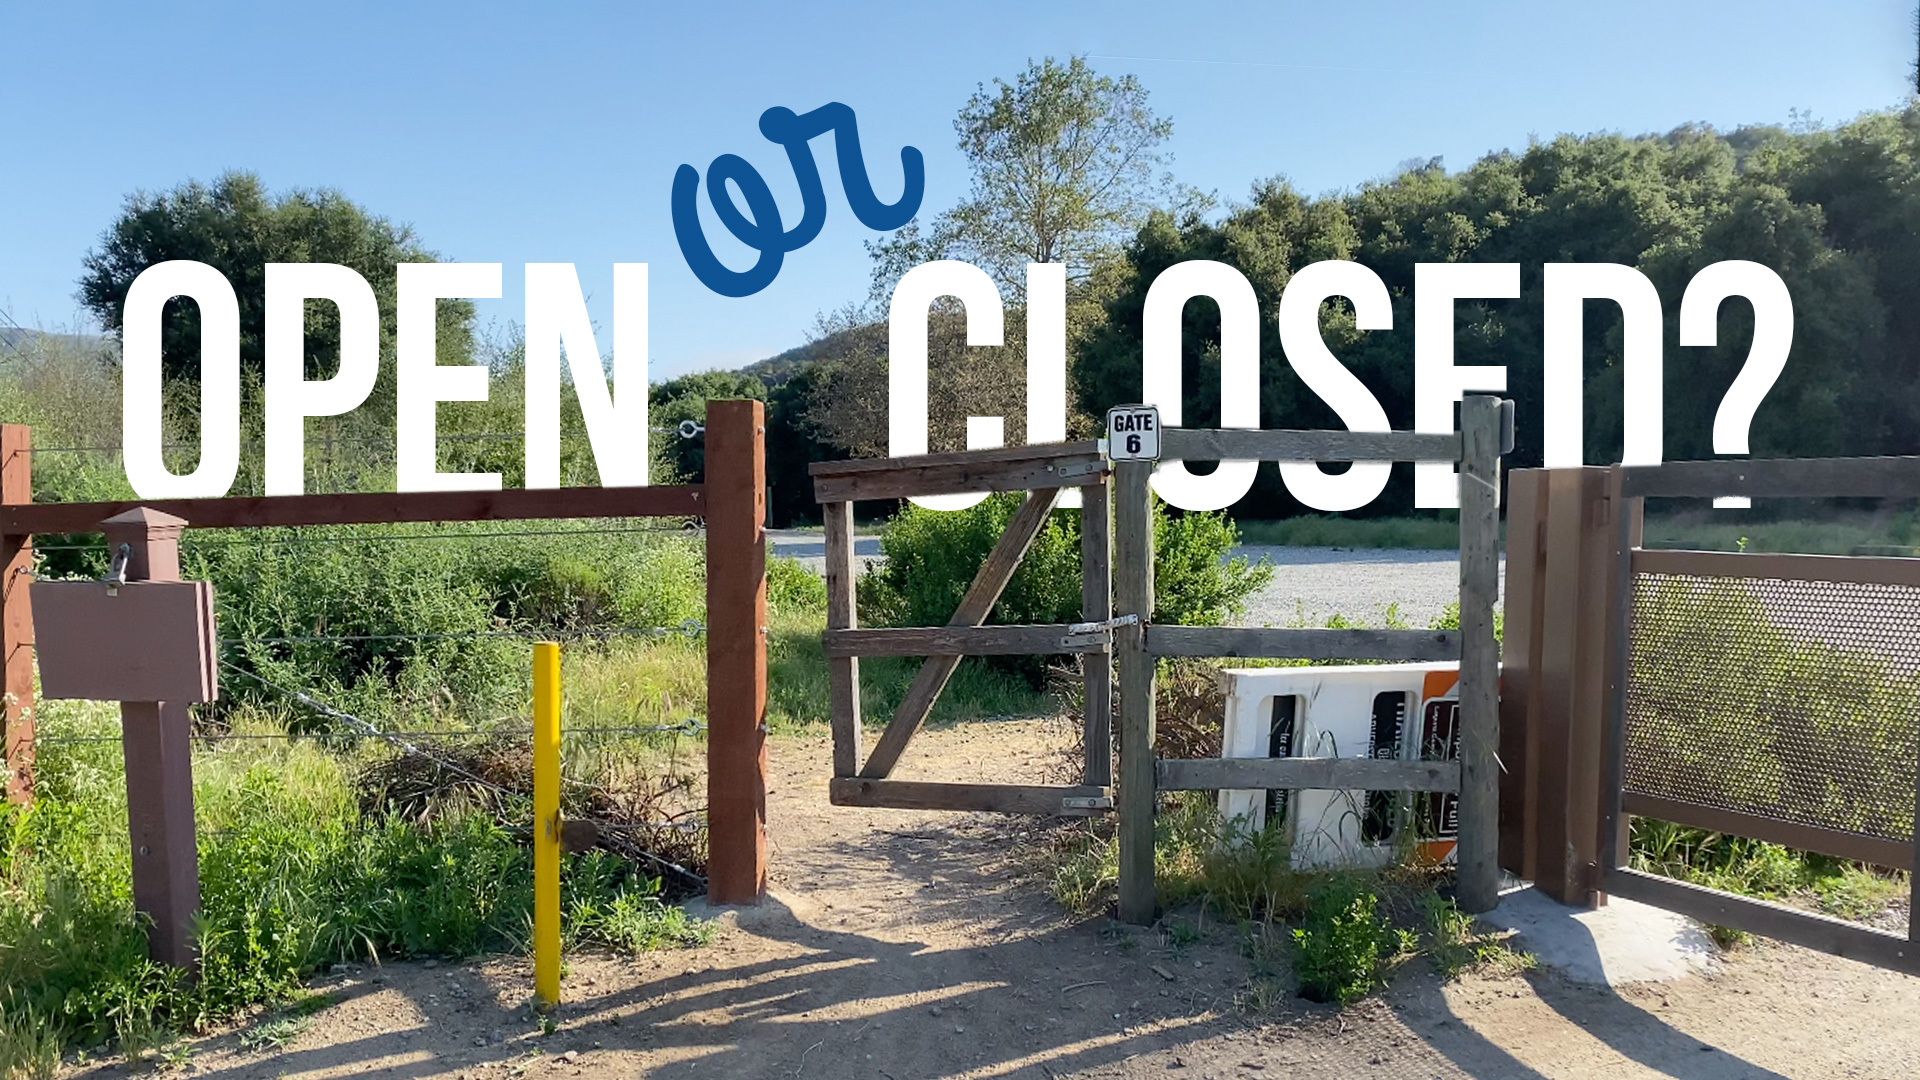 Are the Laguna Beach Trails Open or Closed? It depends.